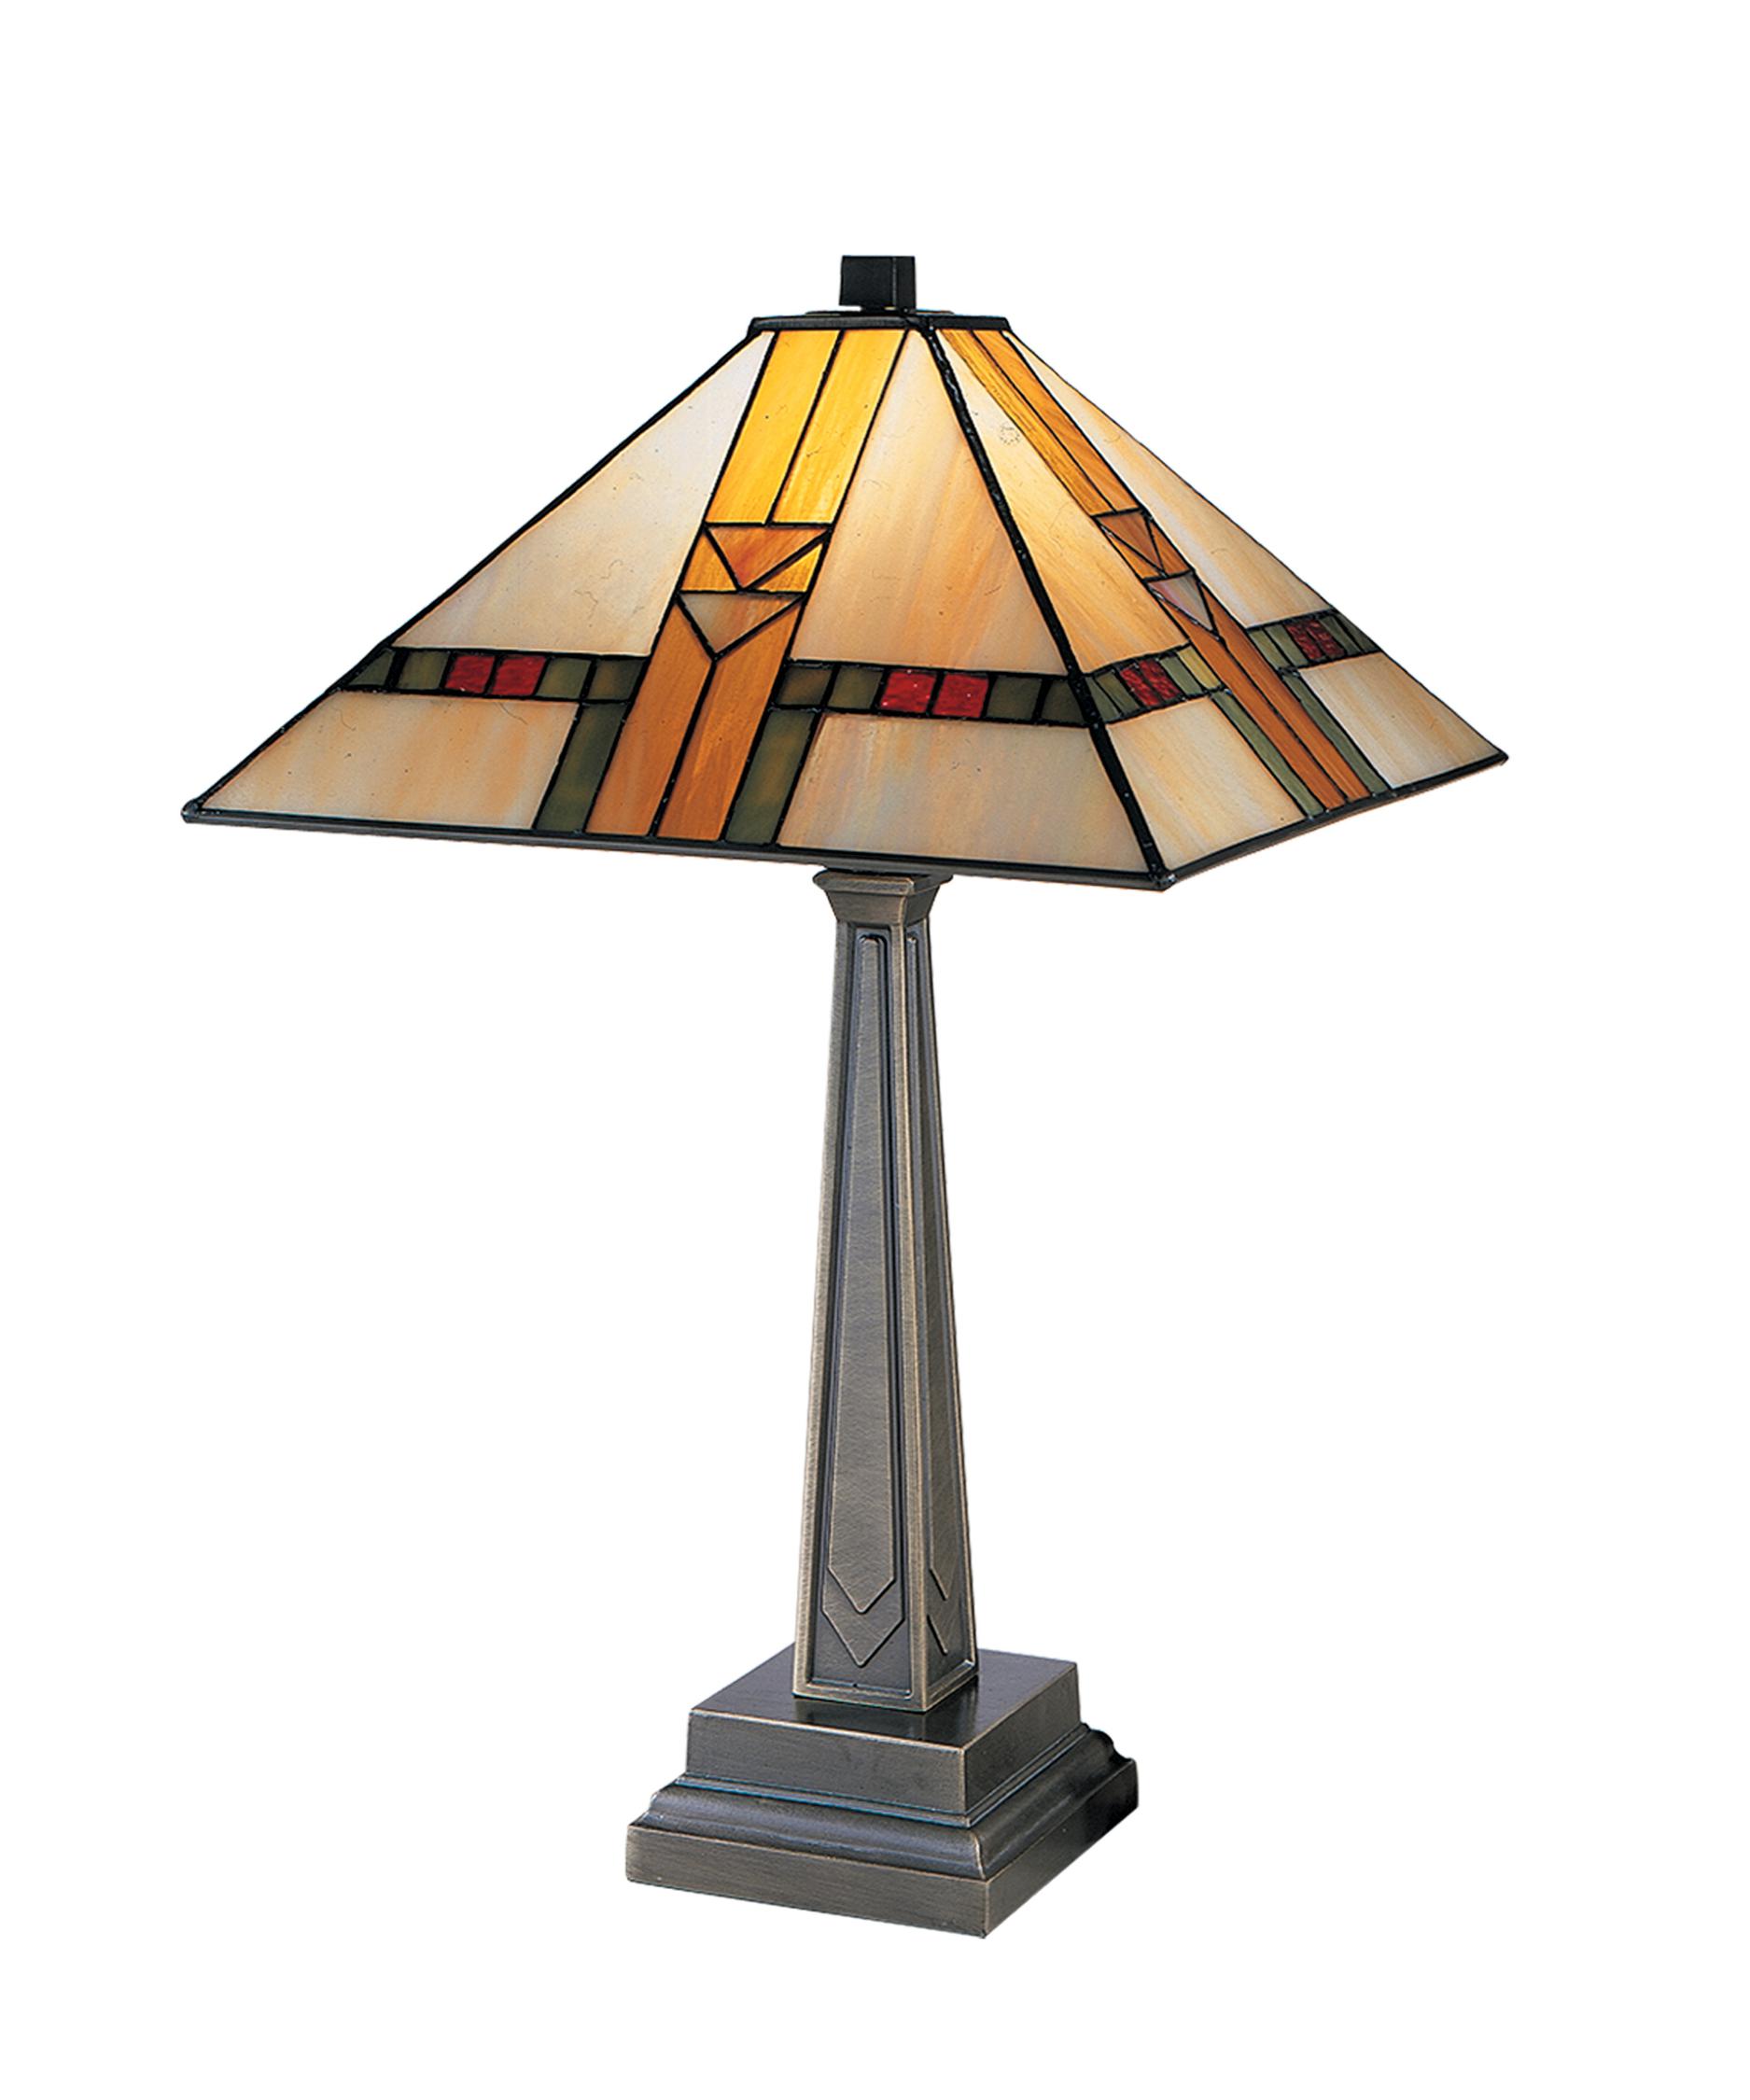 Dale Tiffany 8655-551 Mission 22 Inch Table Lamp